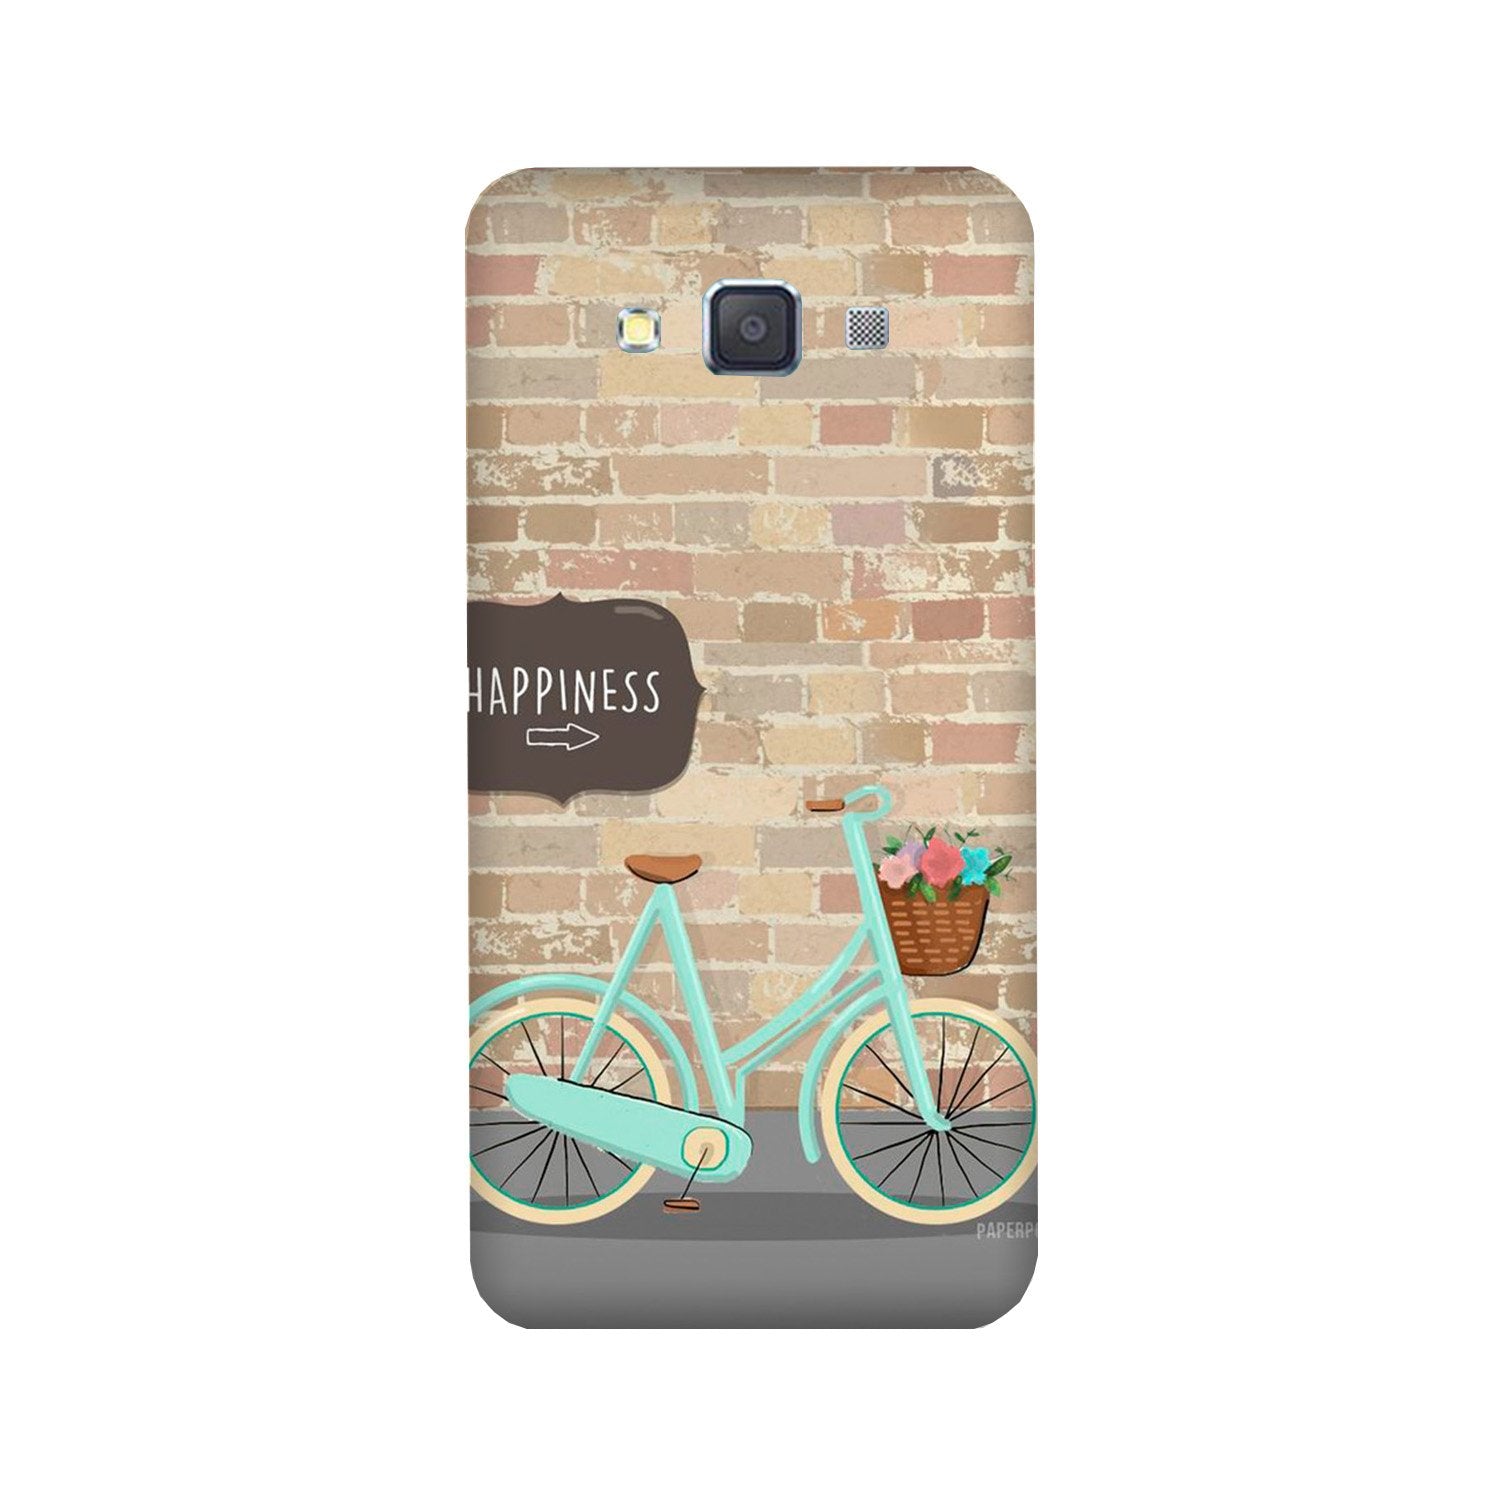 Happiness Case for Galaxy J7 (2016)